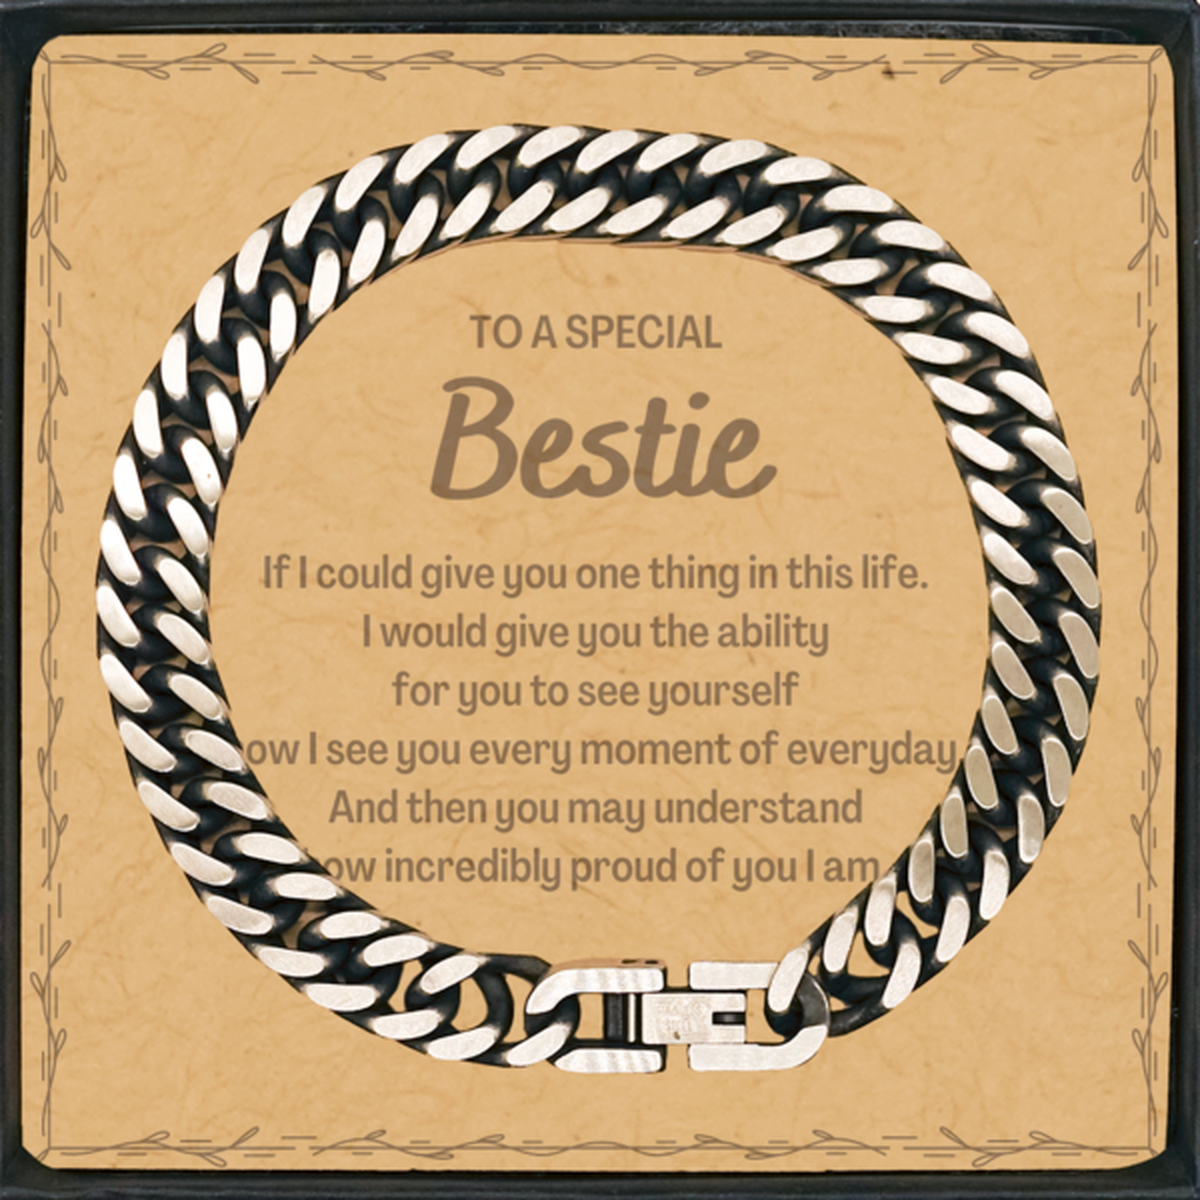 To My Bestie Cuban Link Chain Bracelet, Gifts For Bestie Message Card, Inspirational Gifts for Christmas Birthday, Epic Gifts for Bestie To A Special Bestie how incredibly proud of you I am